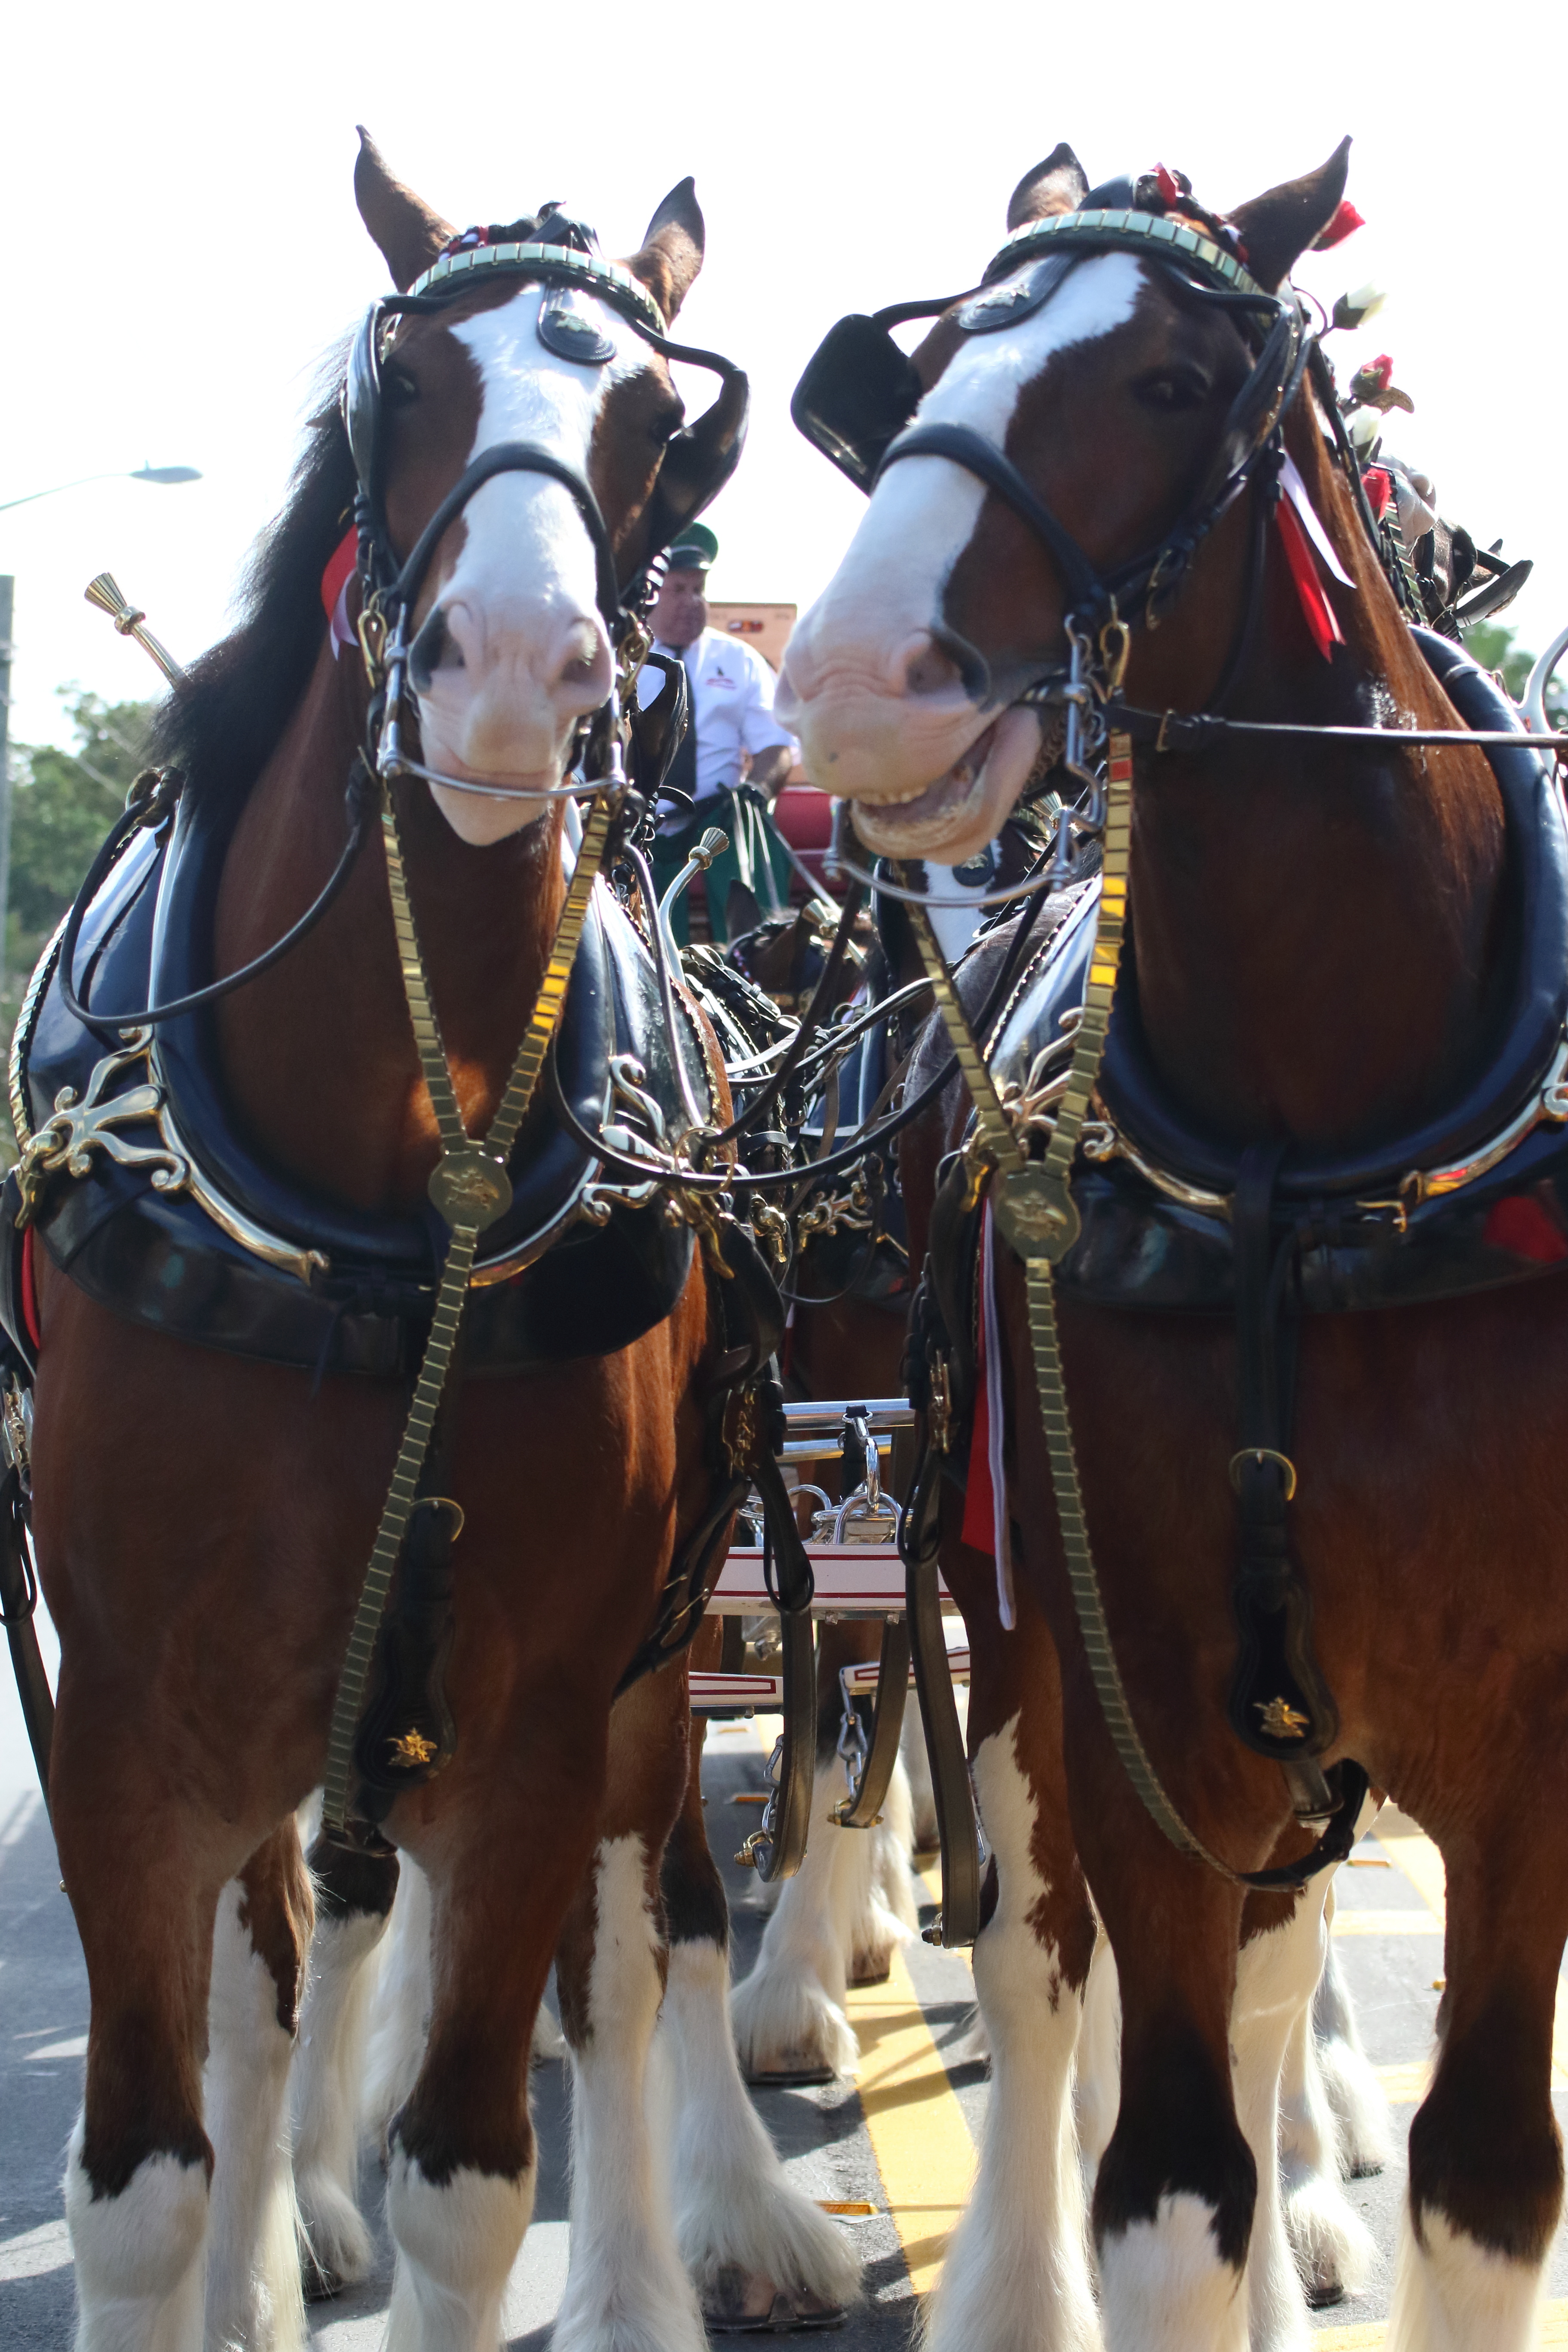 Budweiser Clydesdales Return to Saratoga Race Course